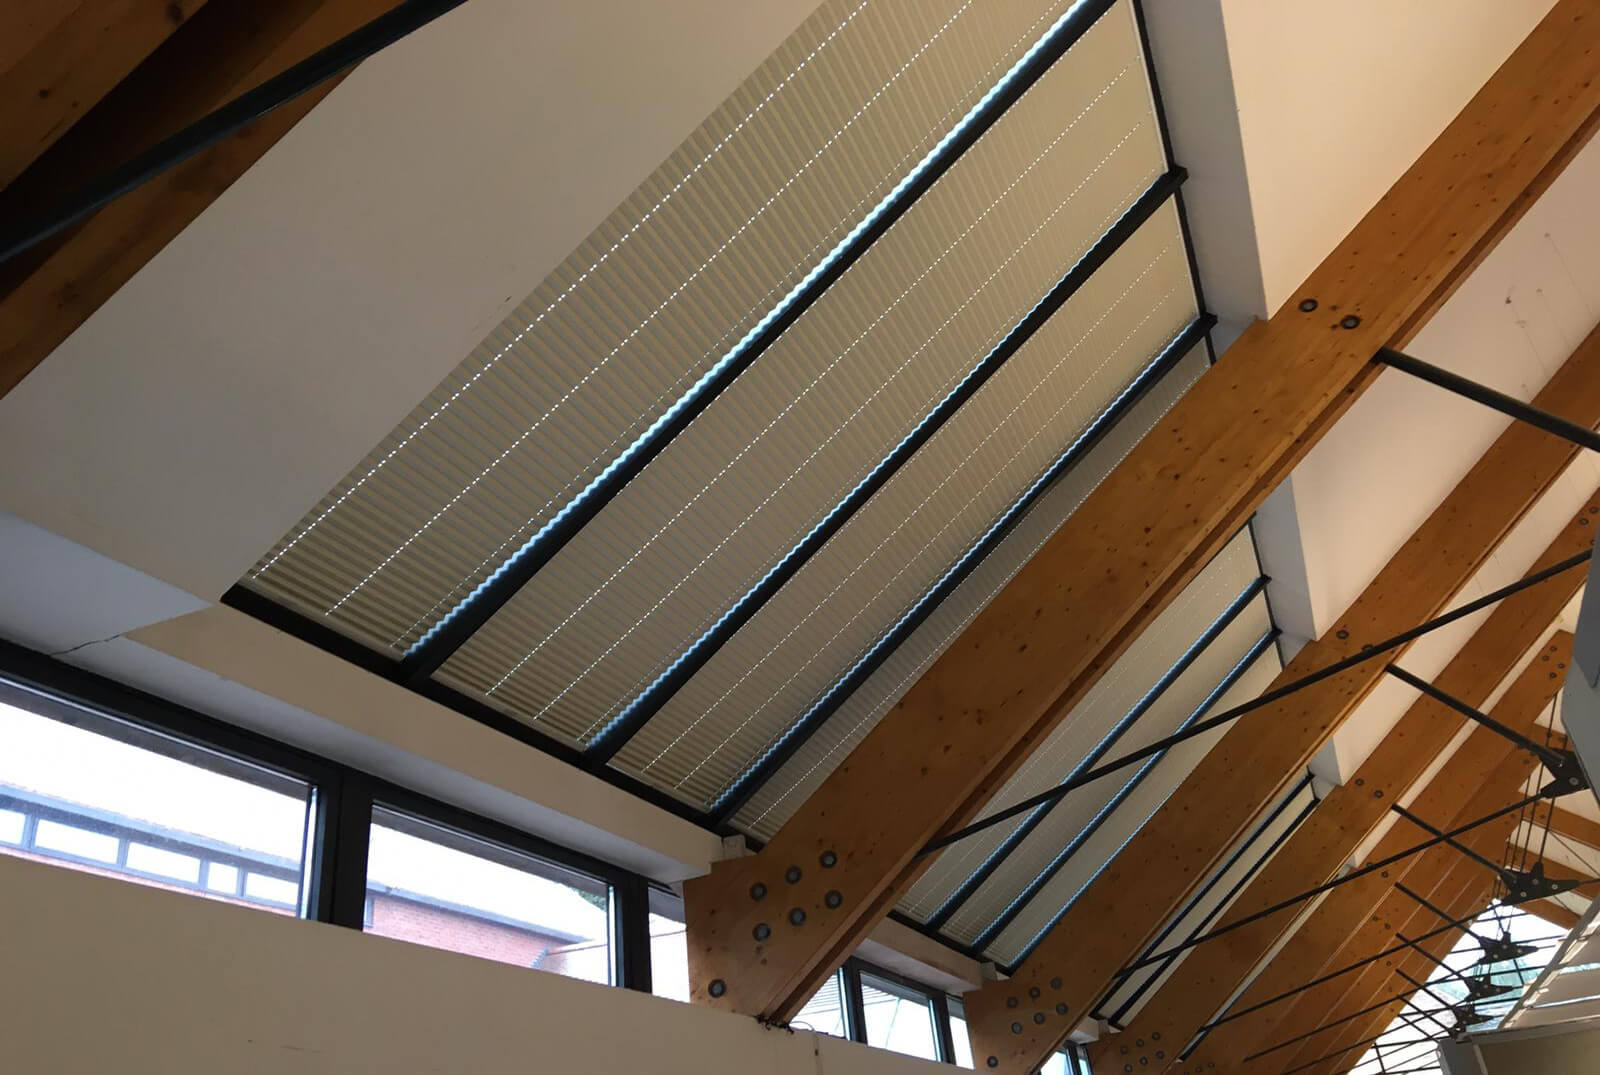 Suppliers of Commercial Blinds For Schools